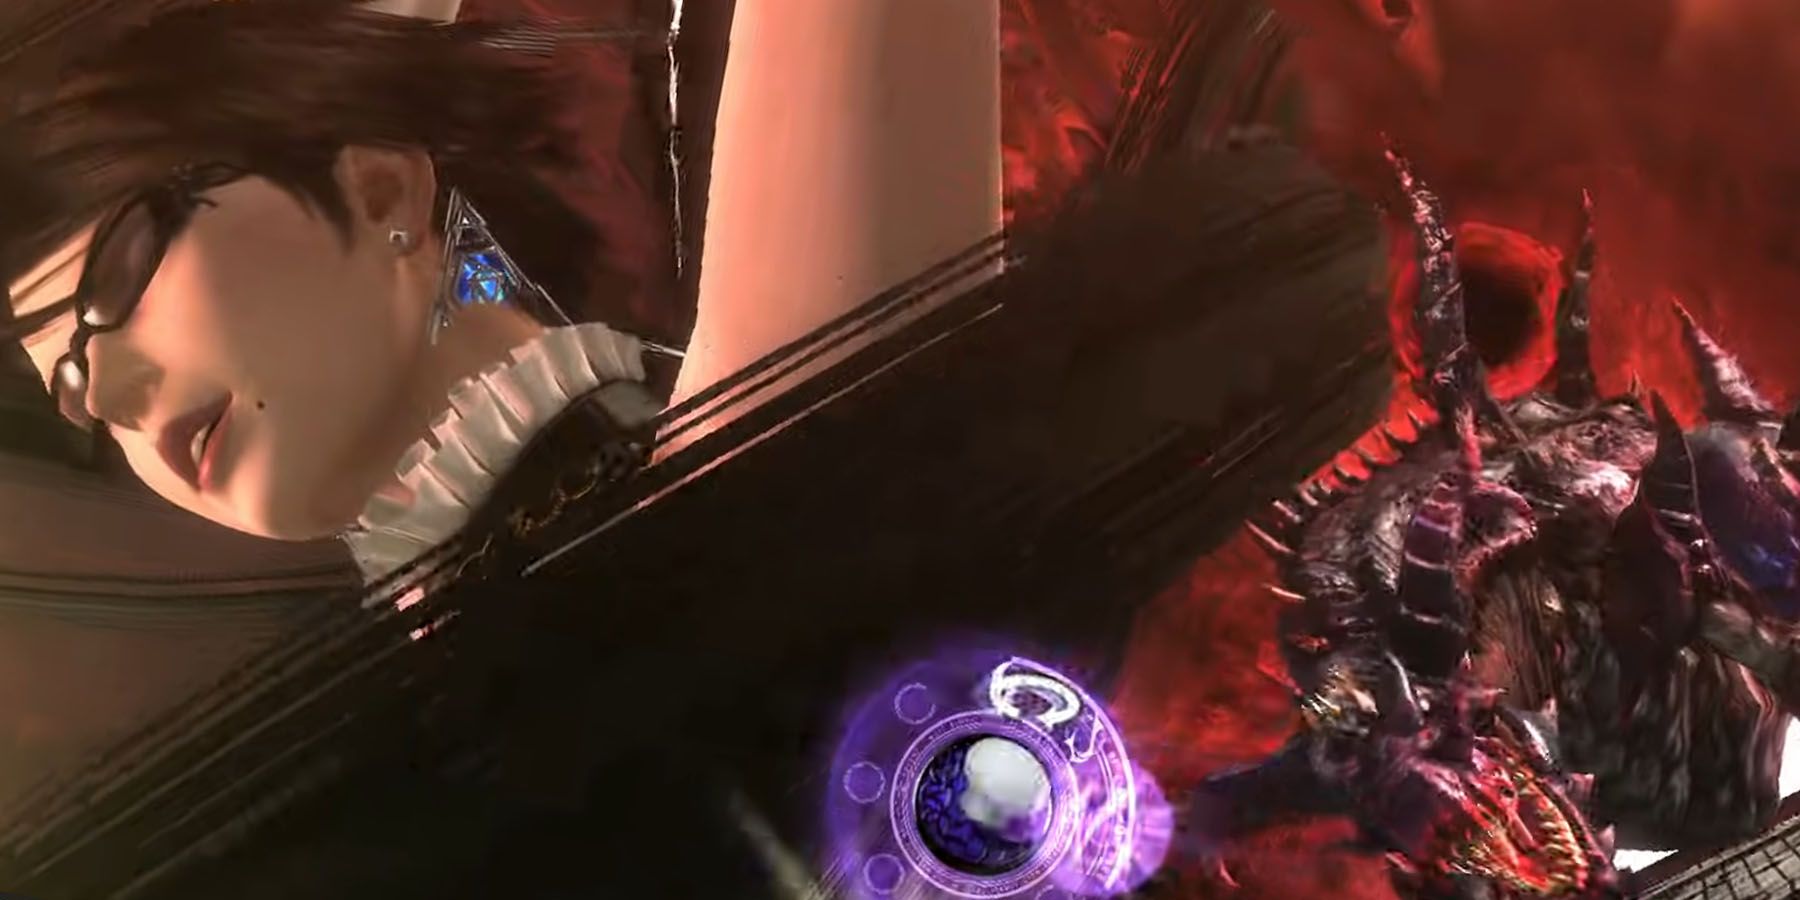 Bayonetta about to summon something with her hair